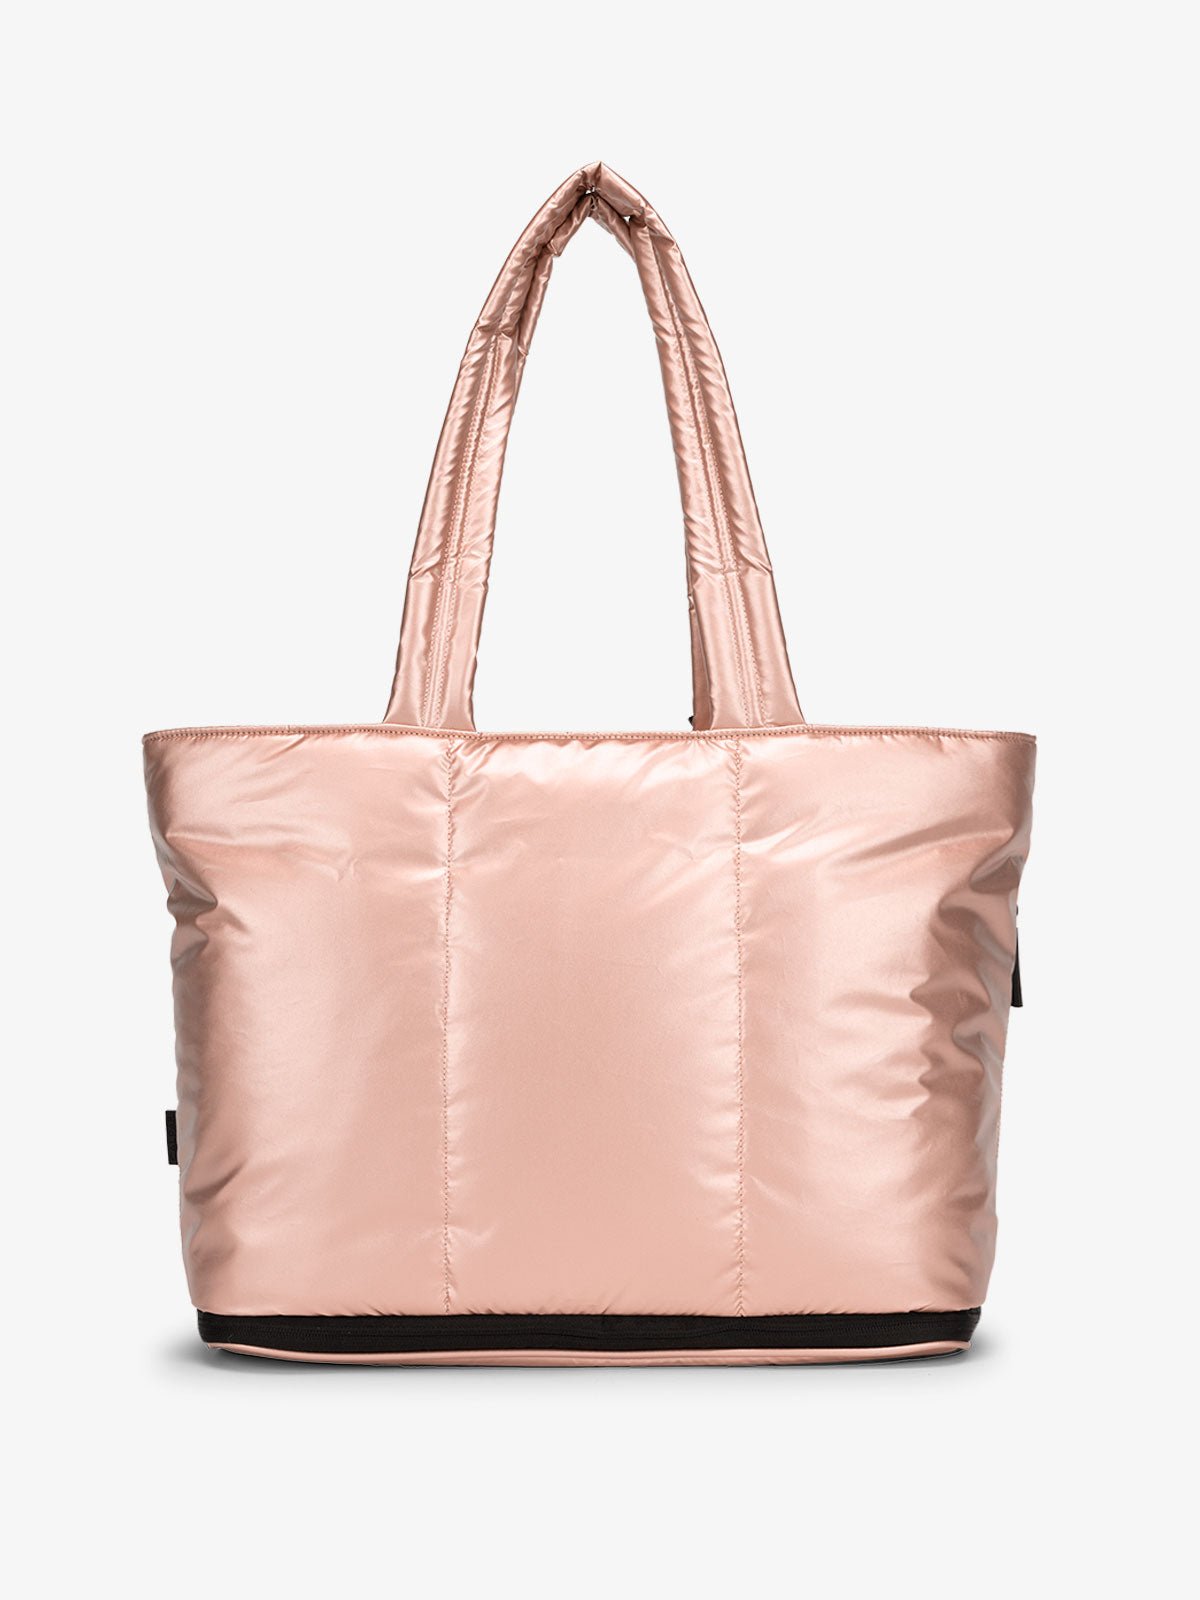 CALPAK Luka expandable tote bag with laptop compartment and padded straps in pink rose gold